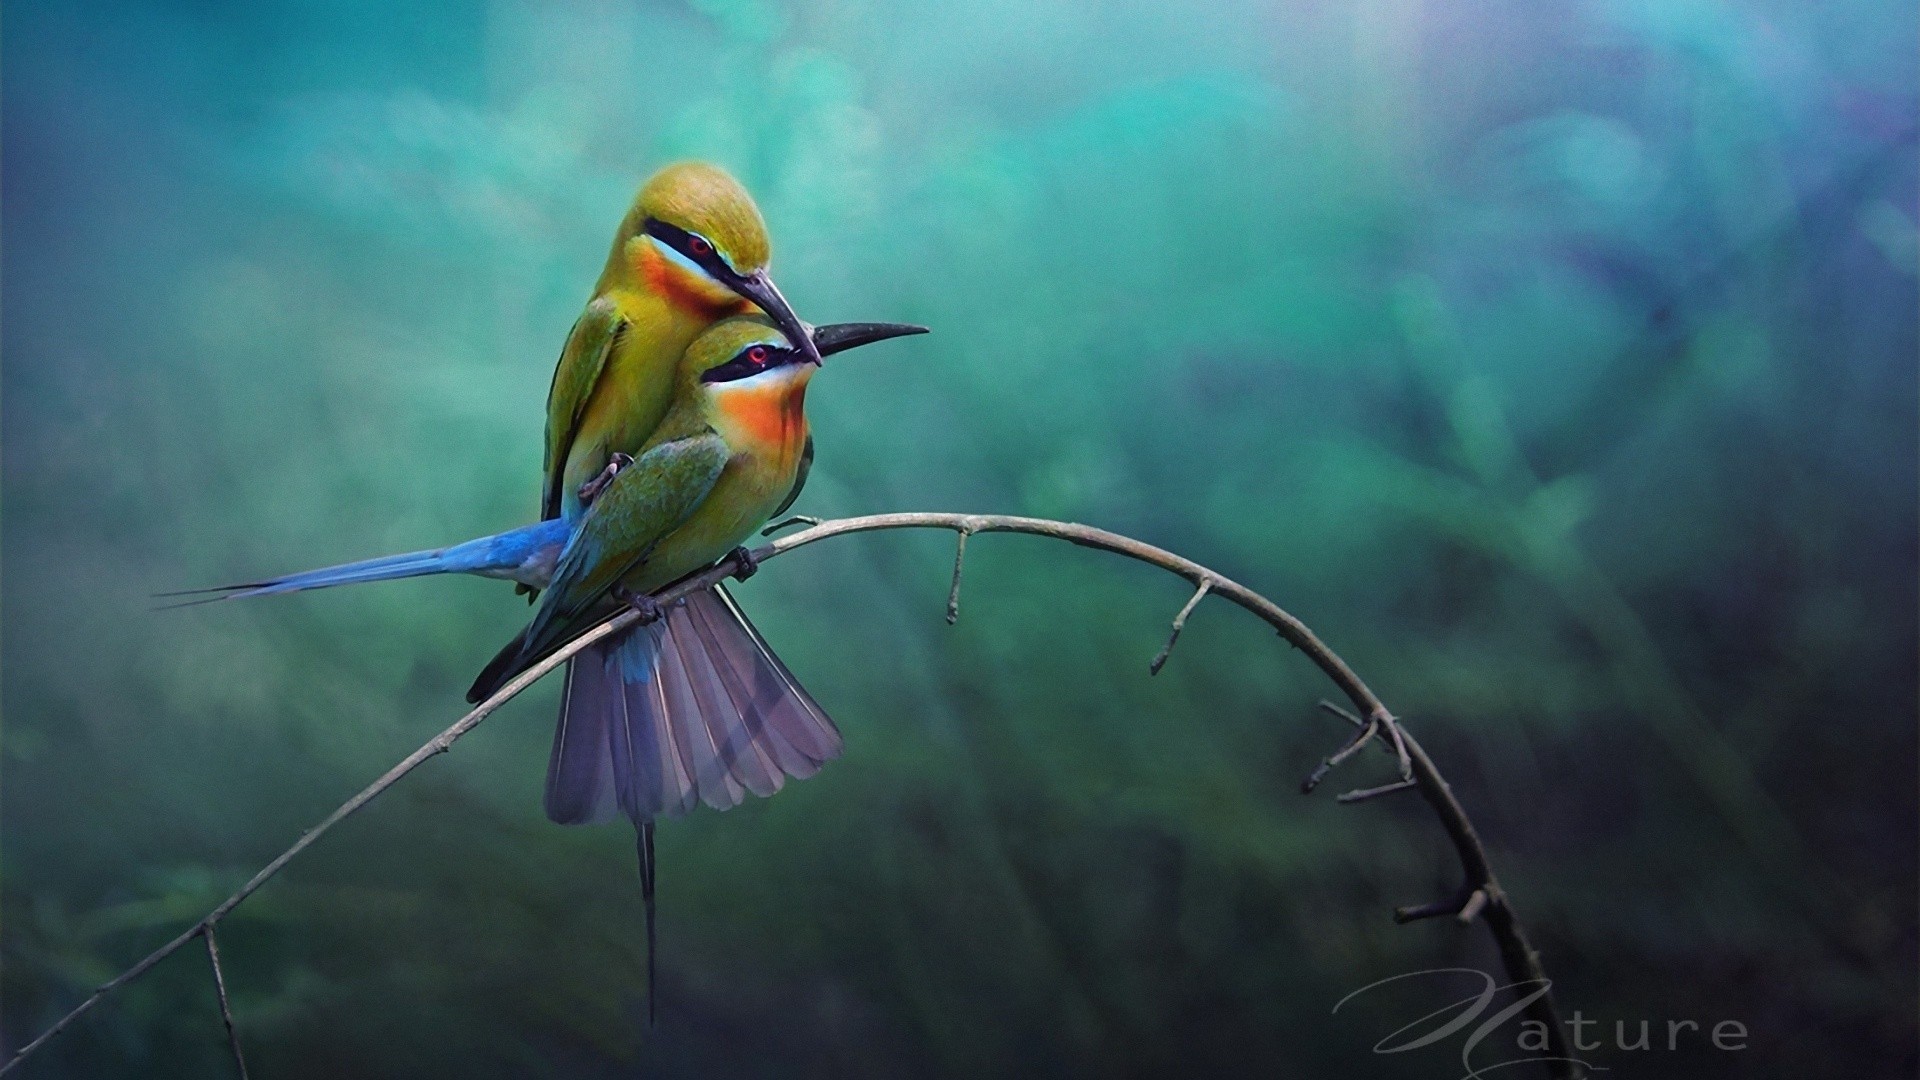 1920x1080 ... individuals to upload images to an Internet website to share them with  friends. Lovebirds Hd Wallpaper Download Free Desktop Wallpaper Images  Regarding ...